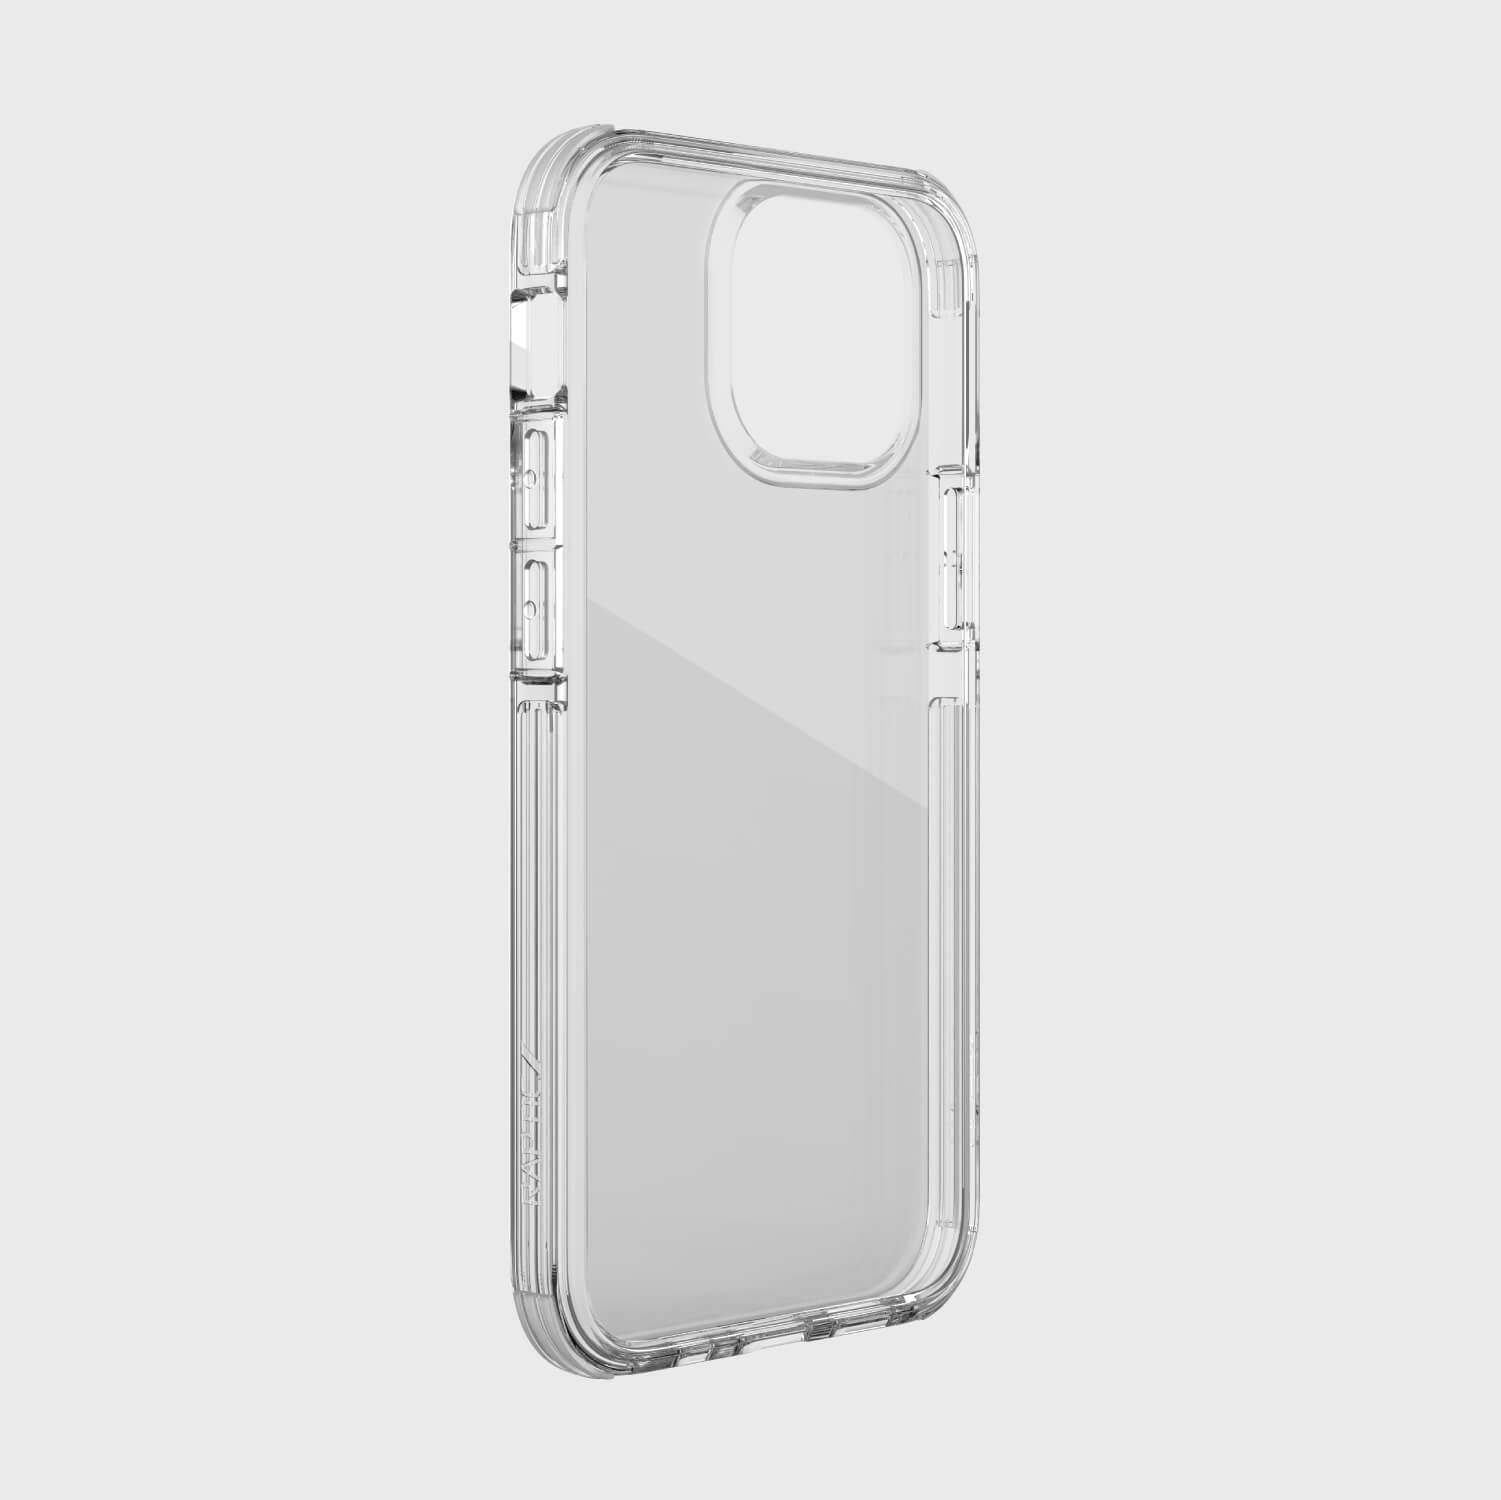 A clear iPhone 13 Mini case by Raptic on a white background.